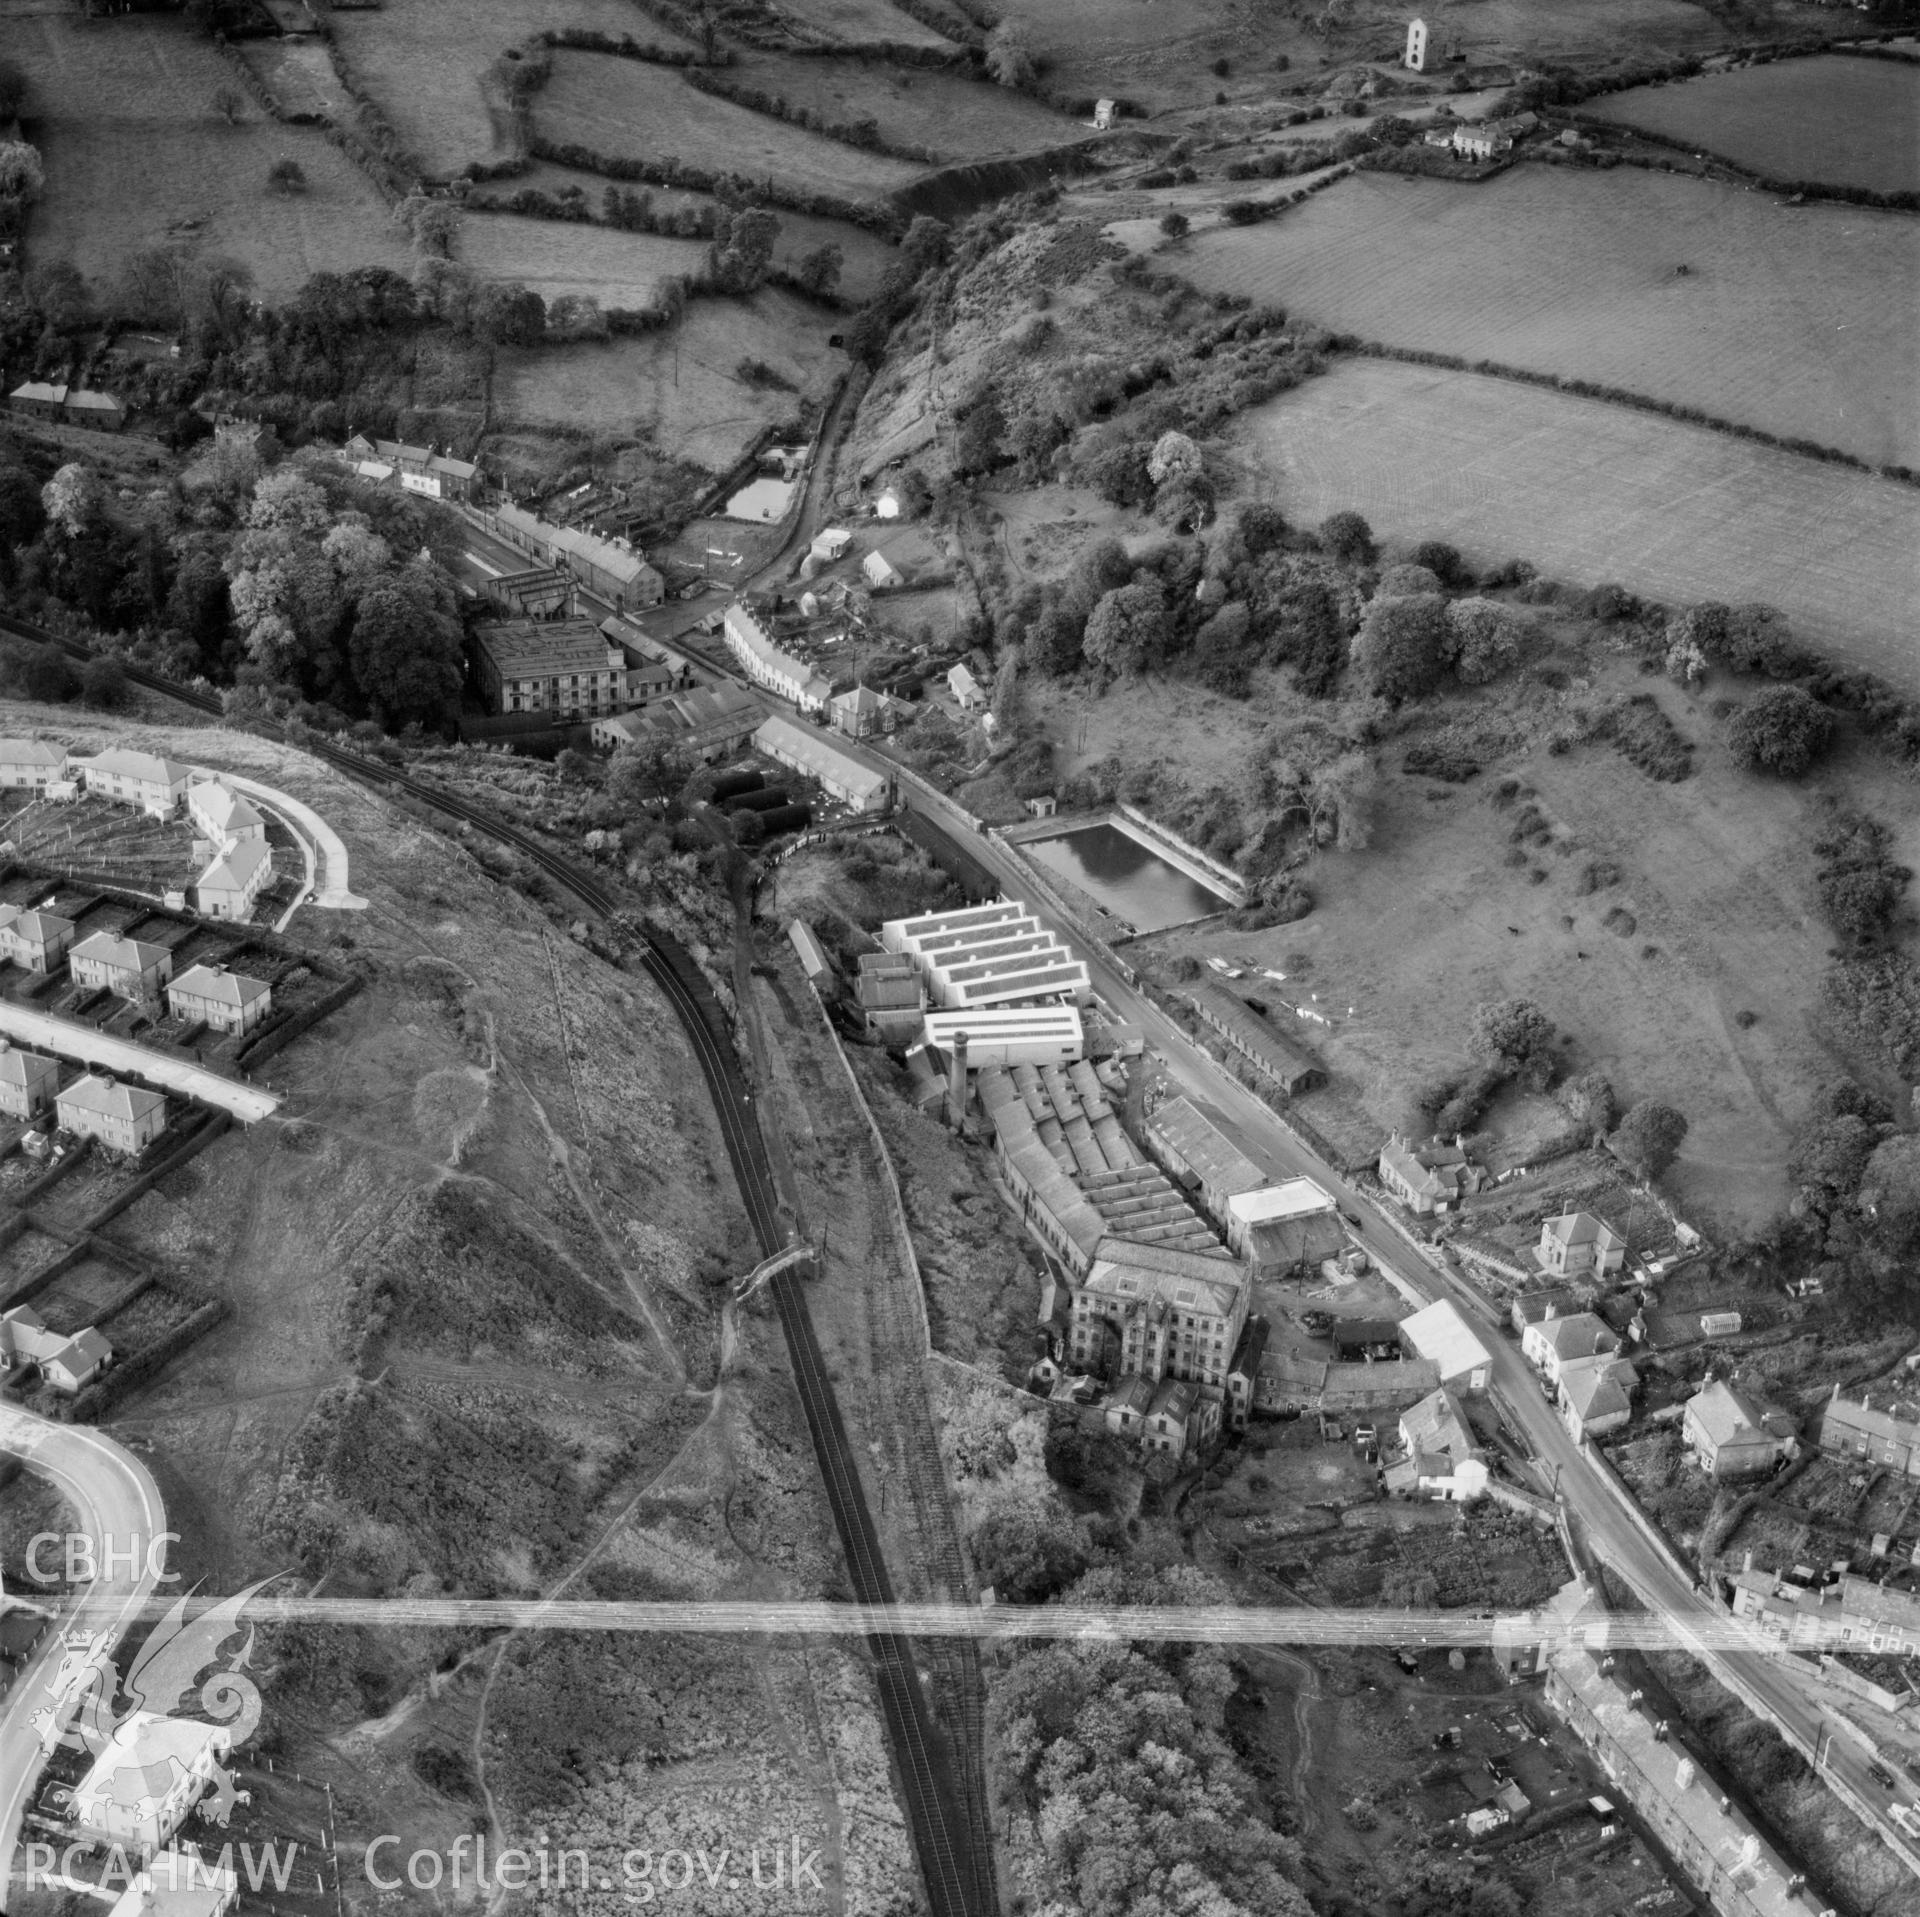 View of Holywell, commissioned by Holywell Textile Mills Ltd., showing industrial buildings and housing estate